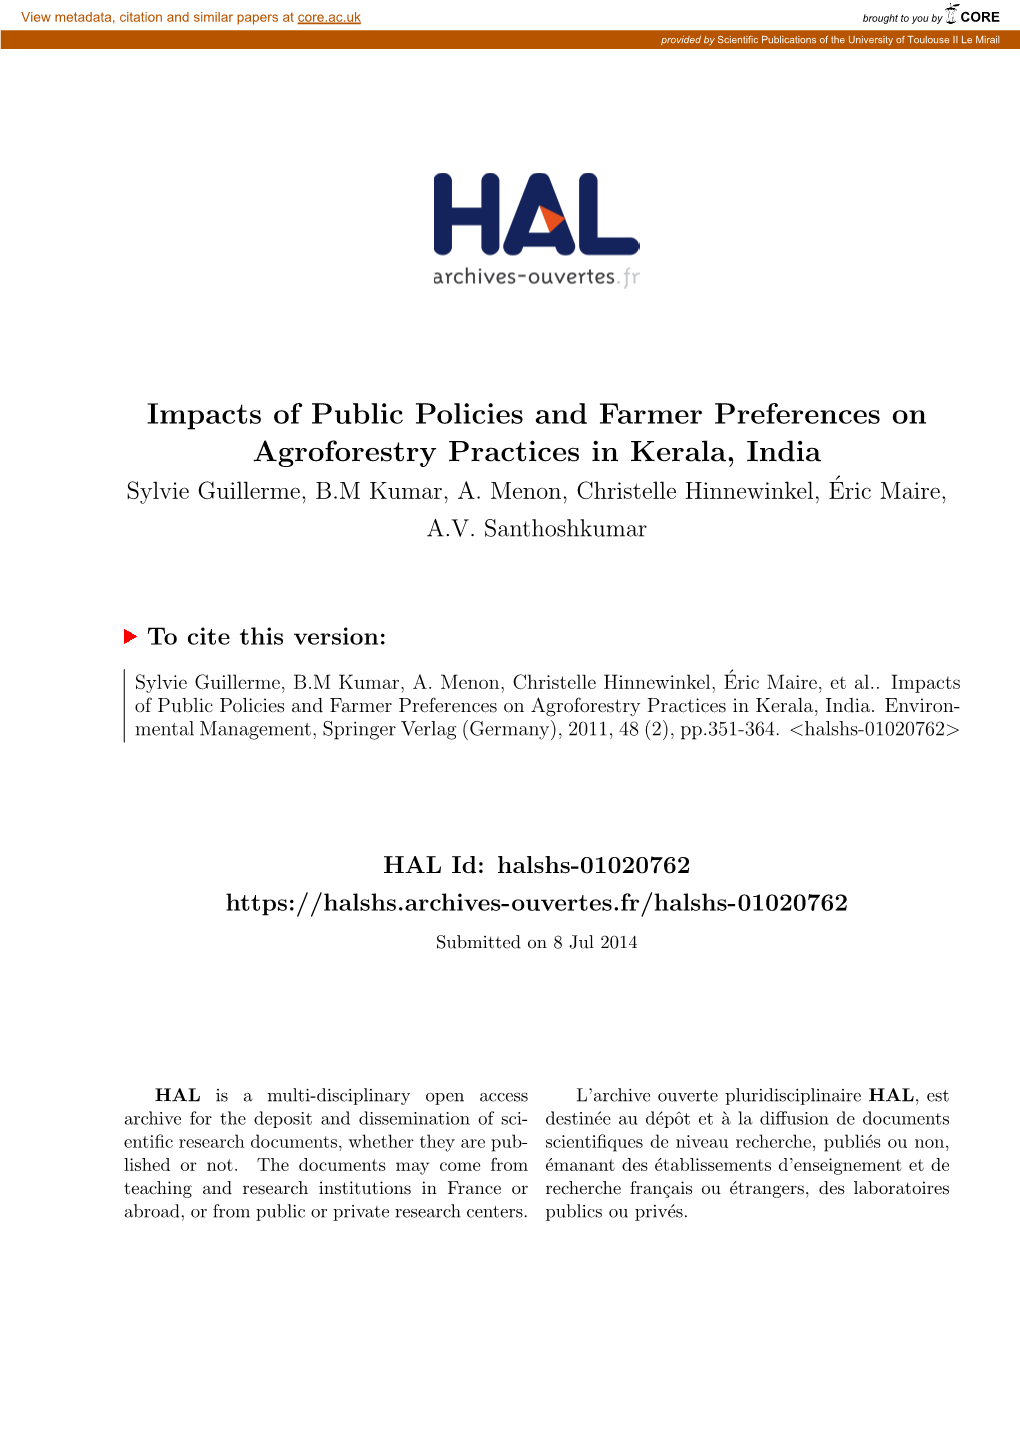 Impacts of Public Policies and Farmer Preferences on Agroforestry Practices in Kerala, India Sylvie Guillerme, B.M Kumar, A